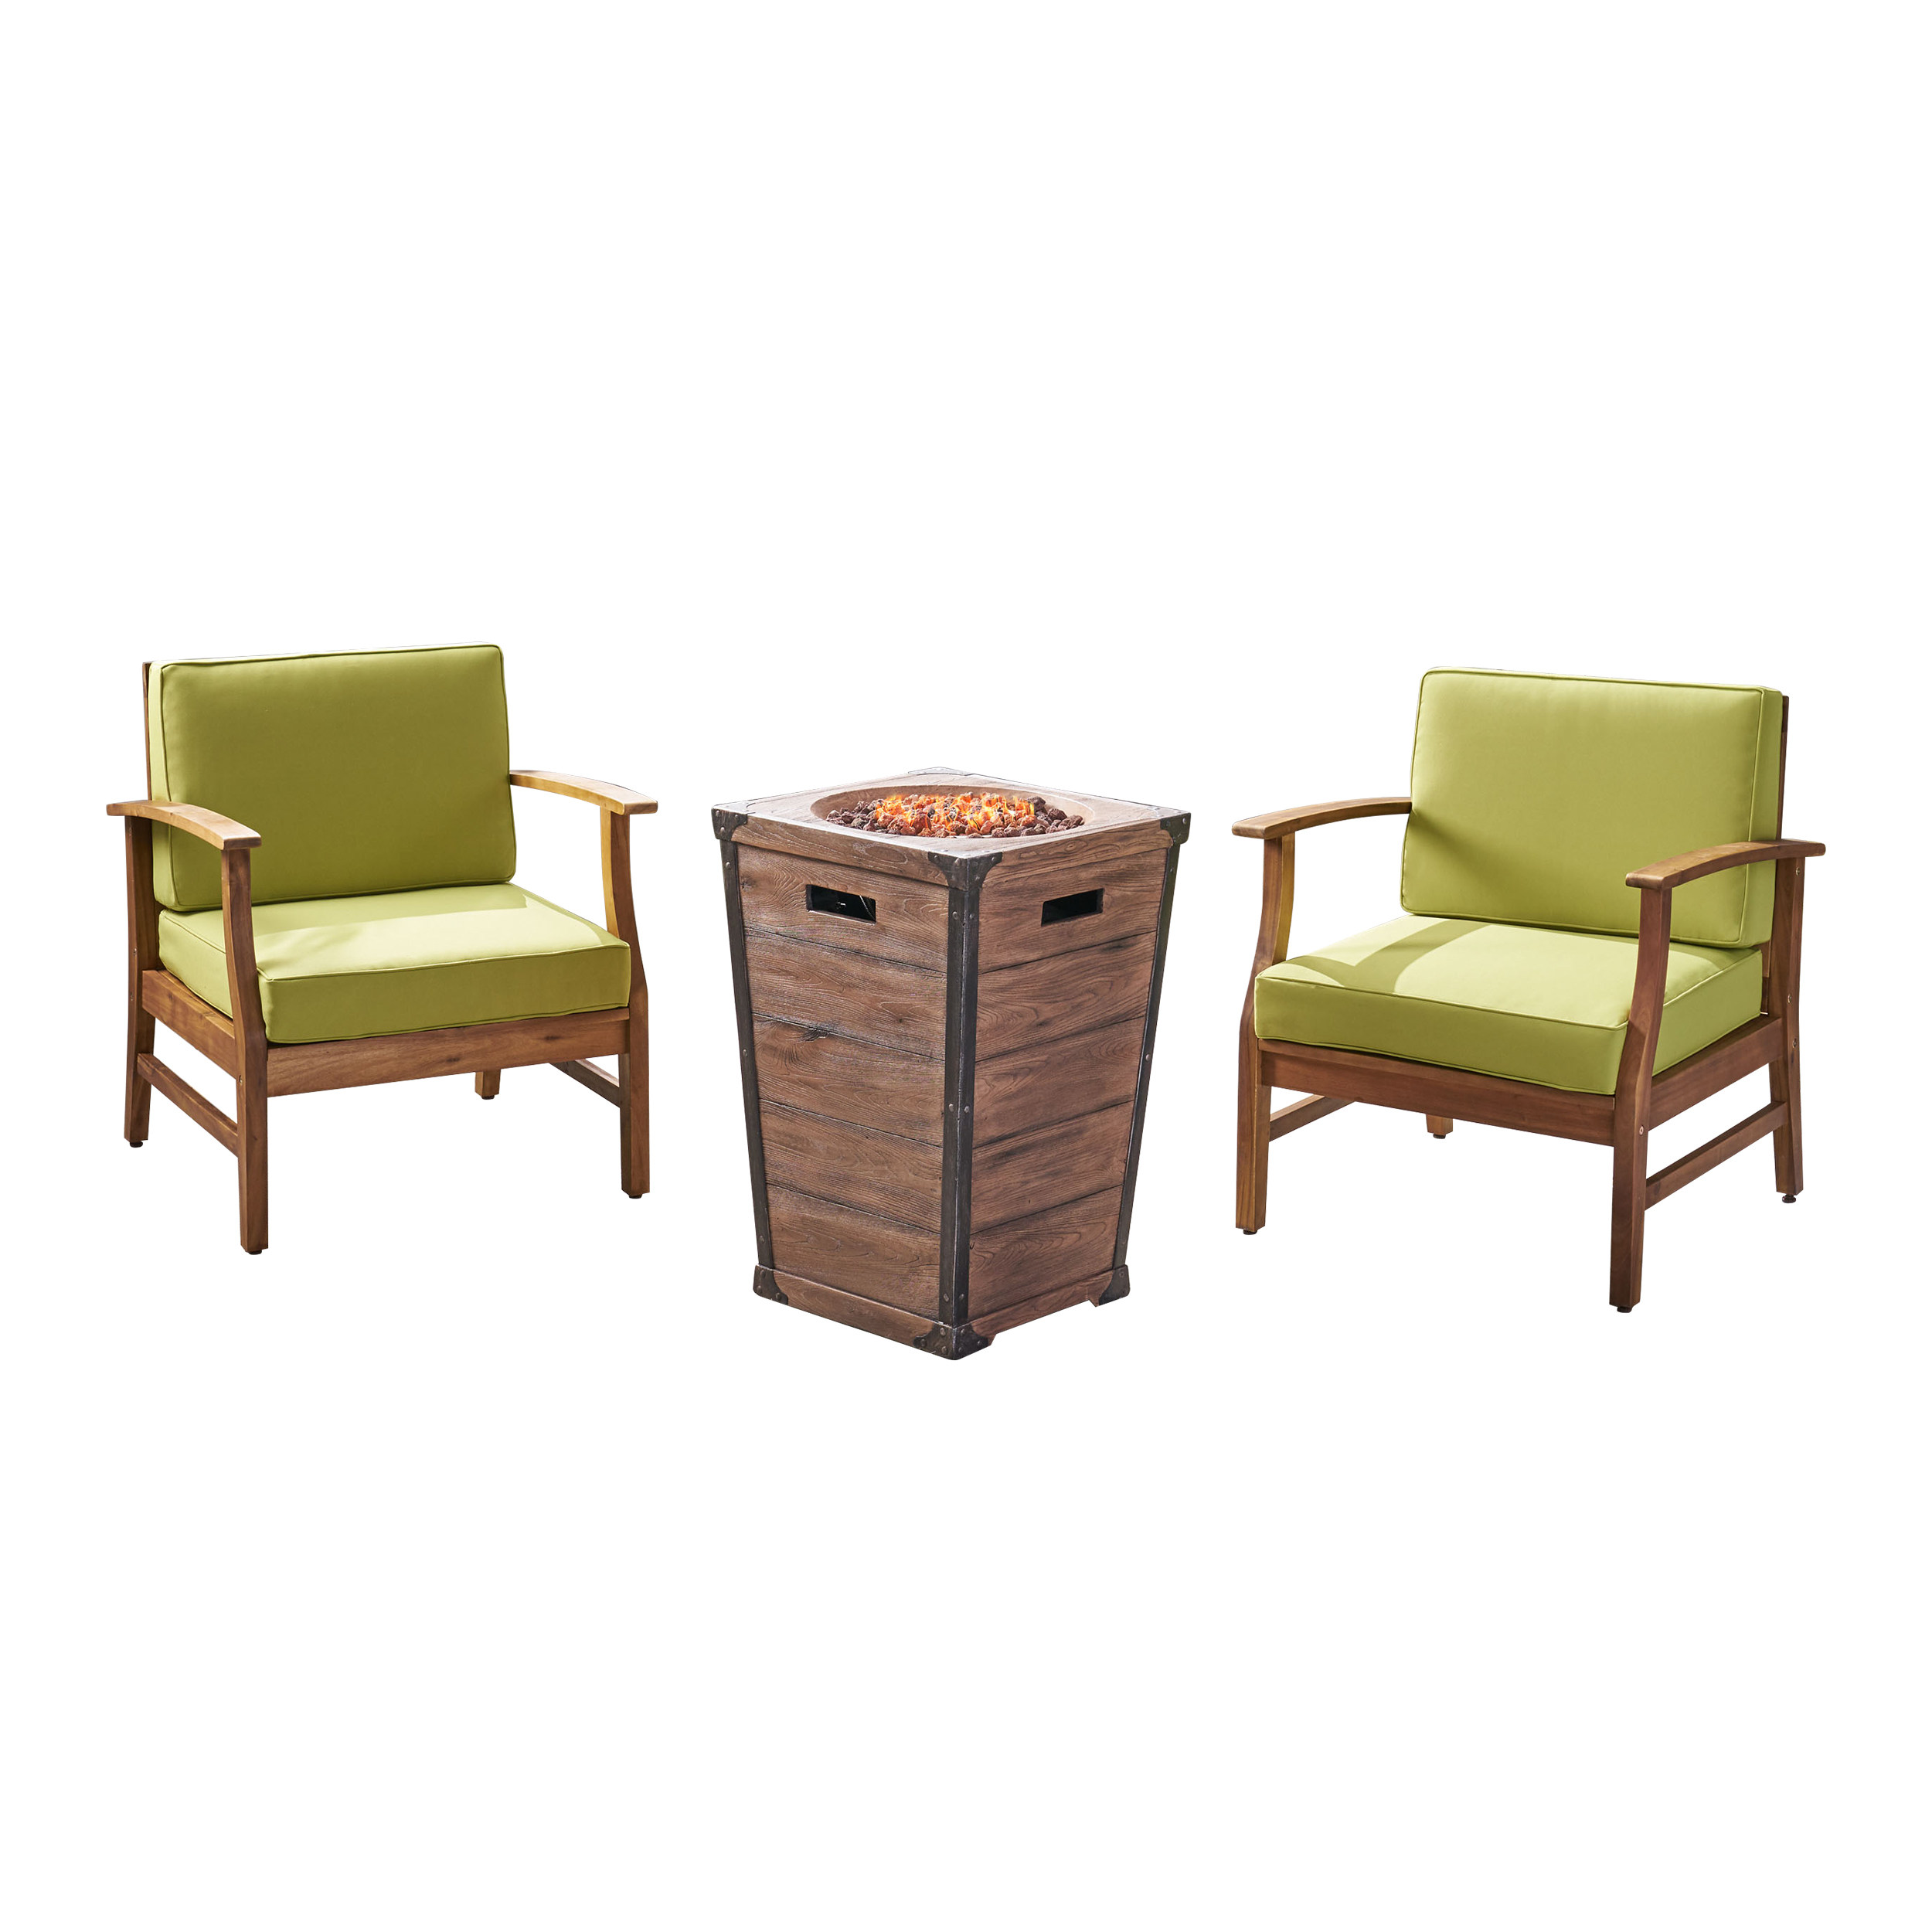 Capri Outdoor 2 Piece Acacia Wood Club Chair Set with Fire Column - image 1 of 9